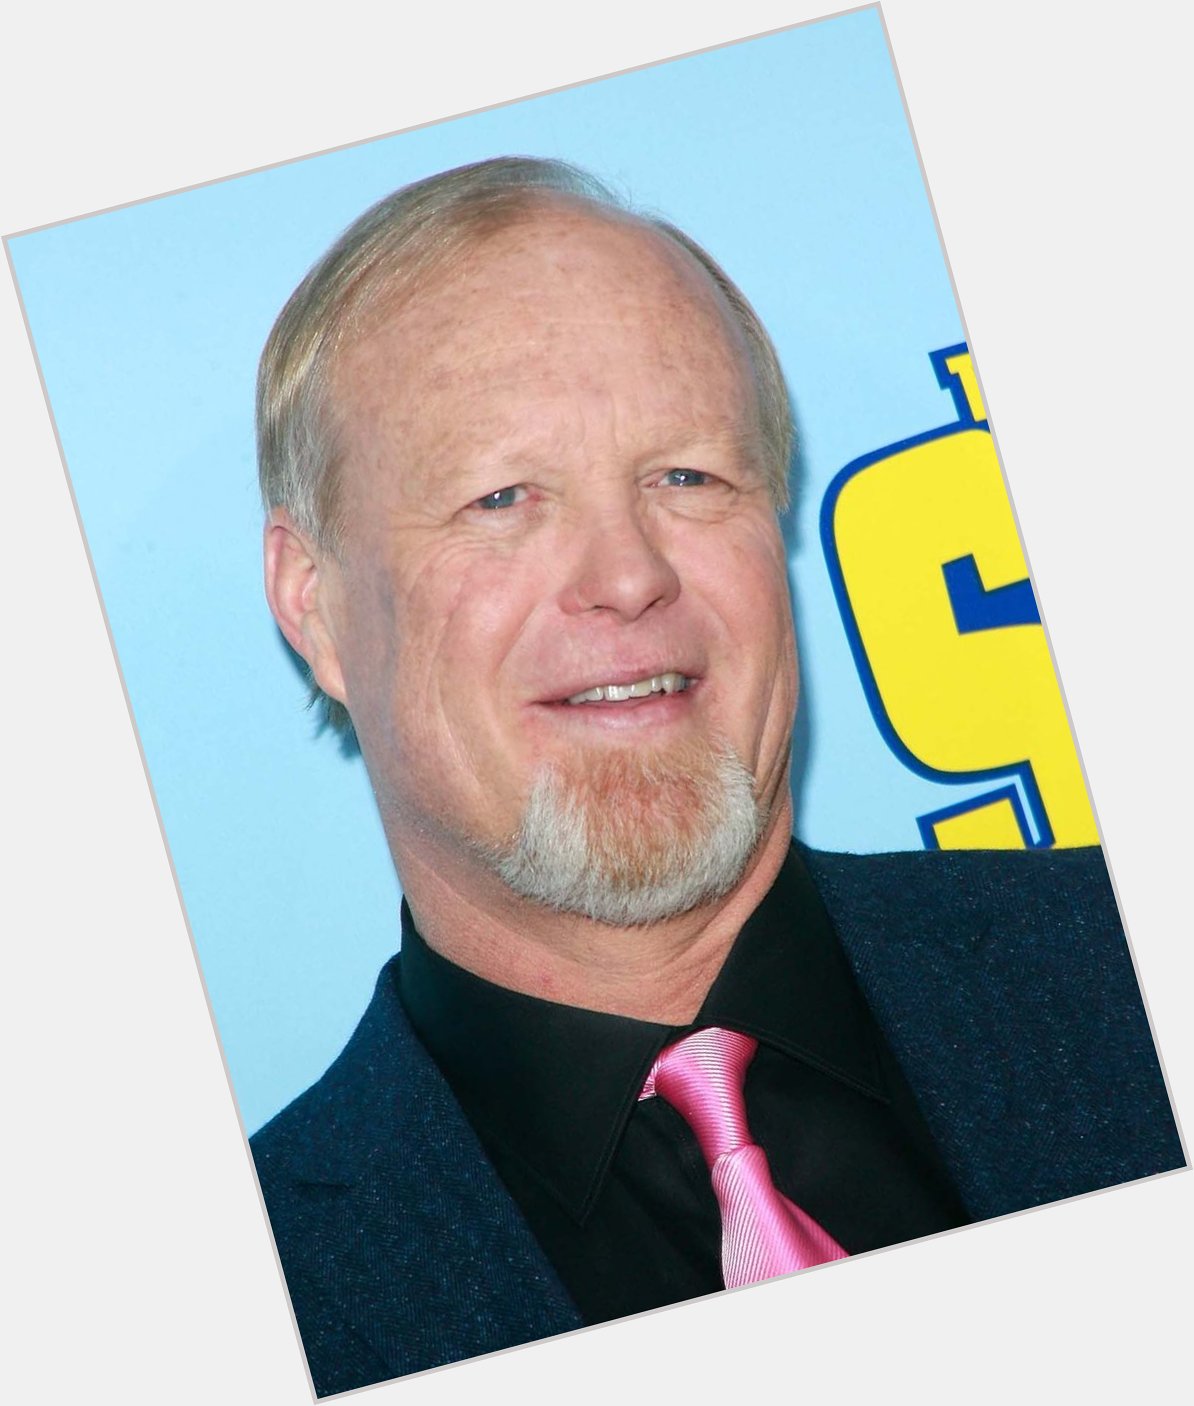 Happy birthday to Bill Fagerbakke, the voice of Patrick Star!  